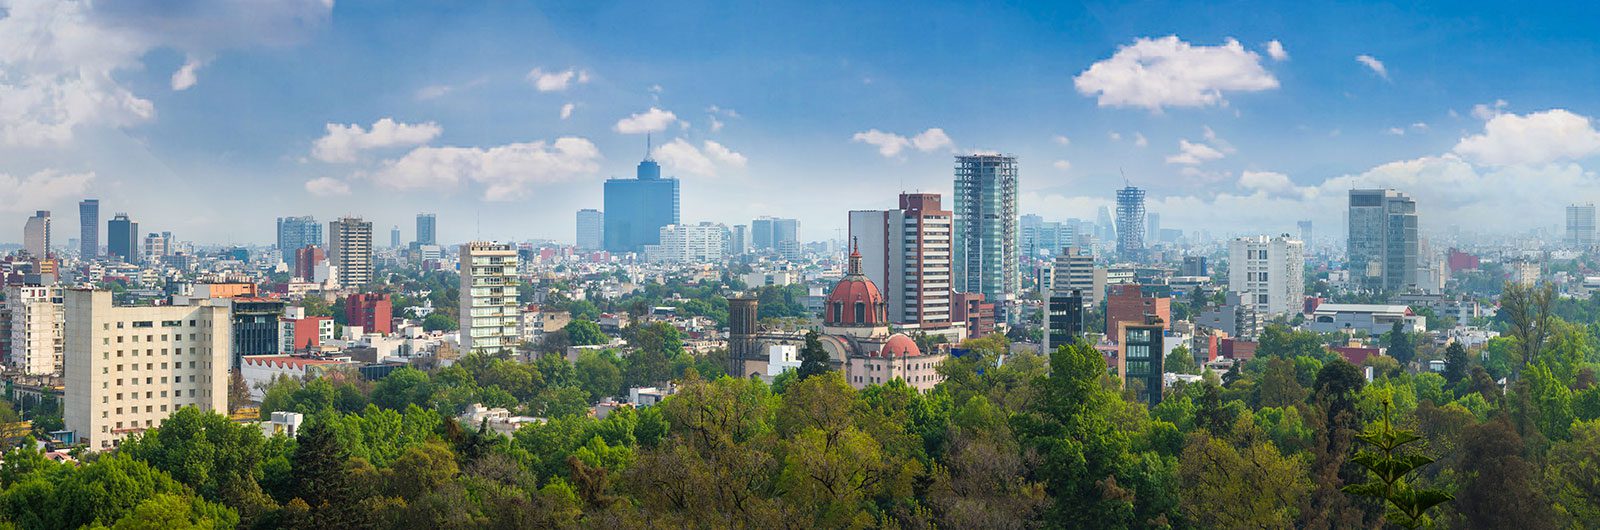 Top 5 Things To Do In Mexico City